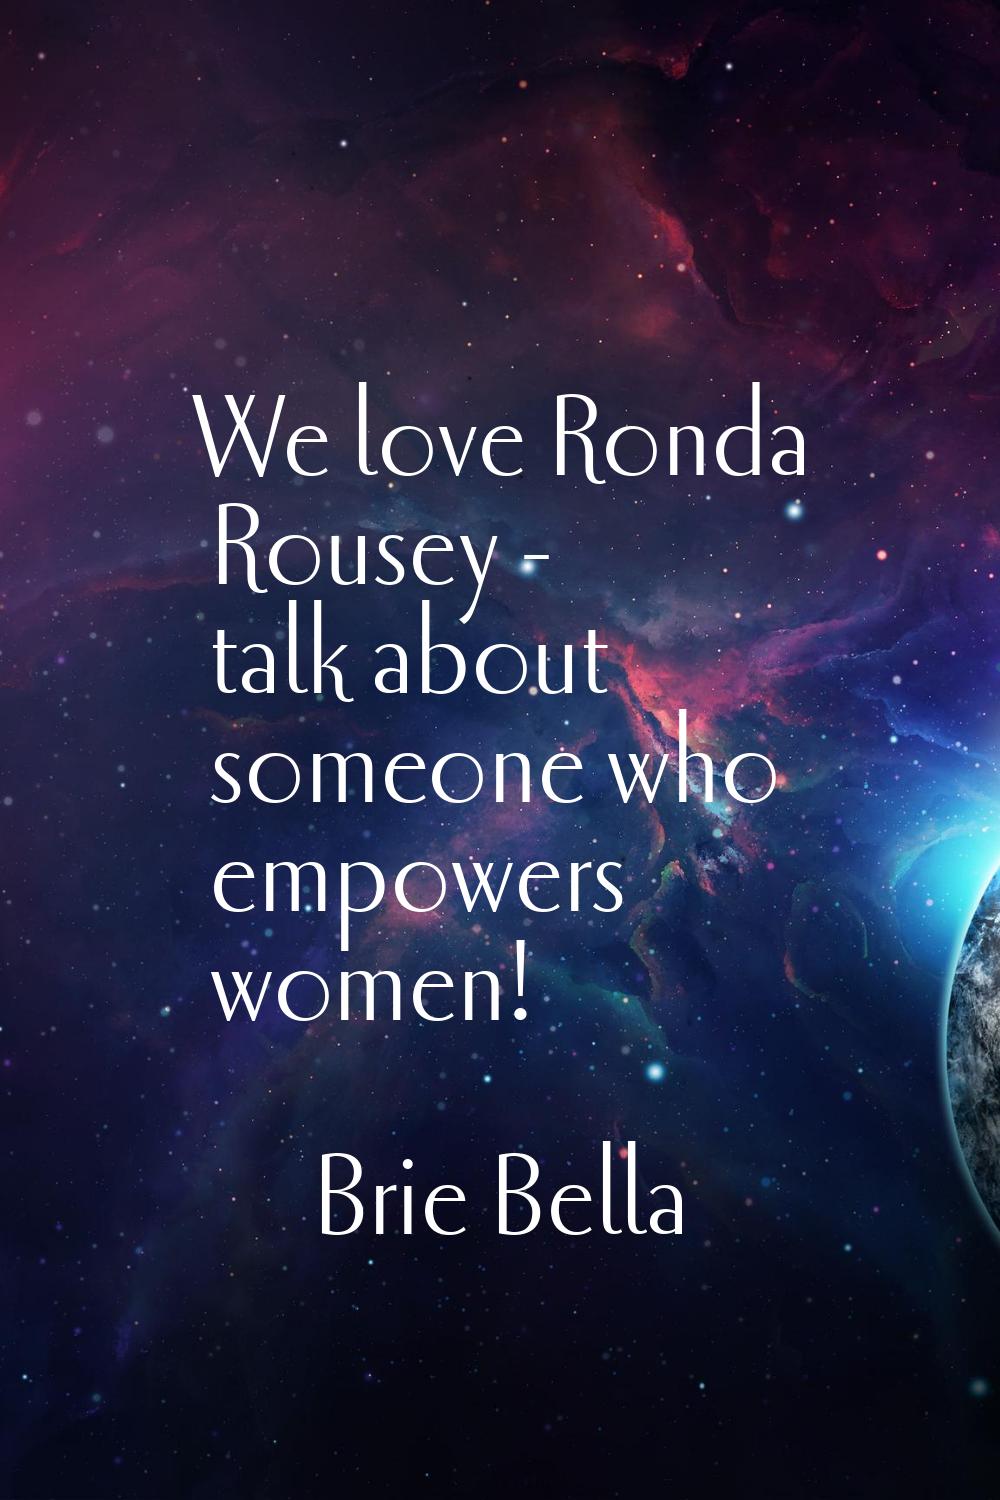 We love Ronda Rousey - talk about someone who empowers women!